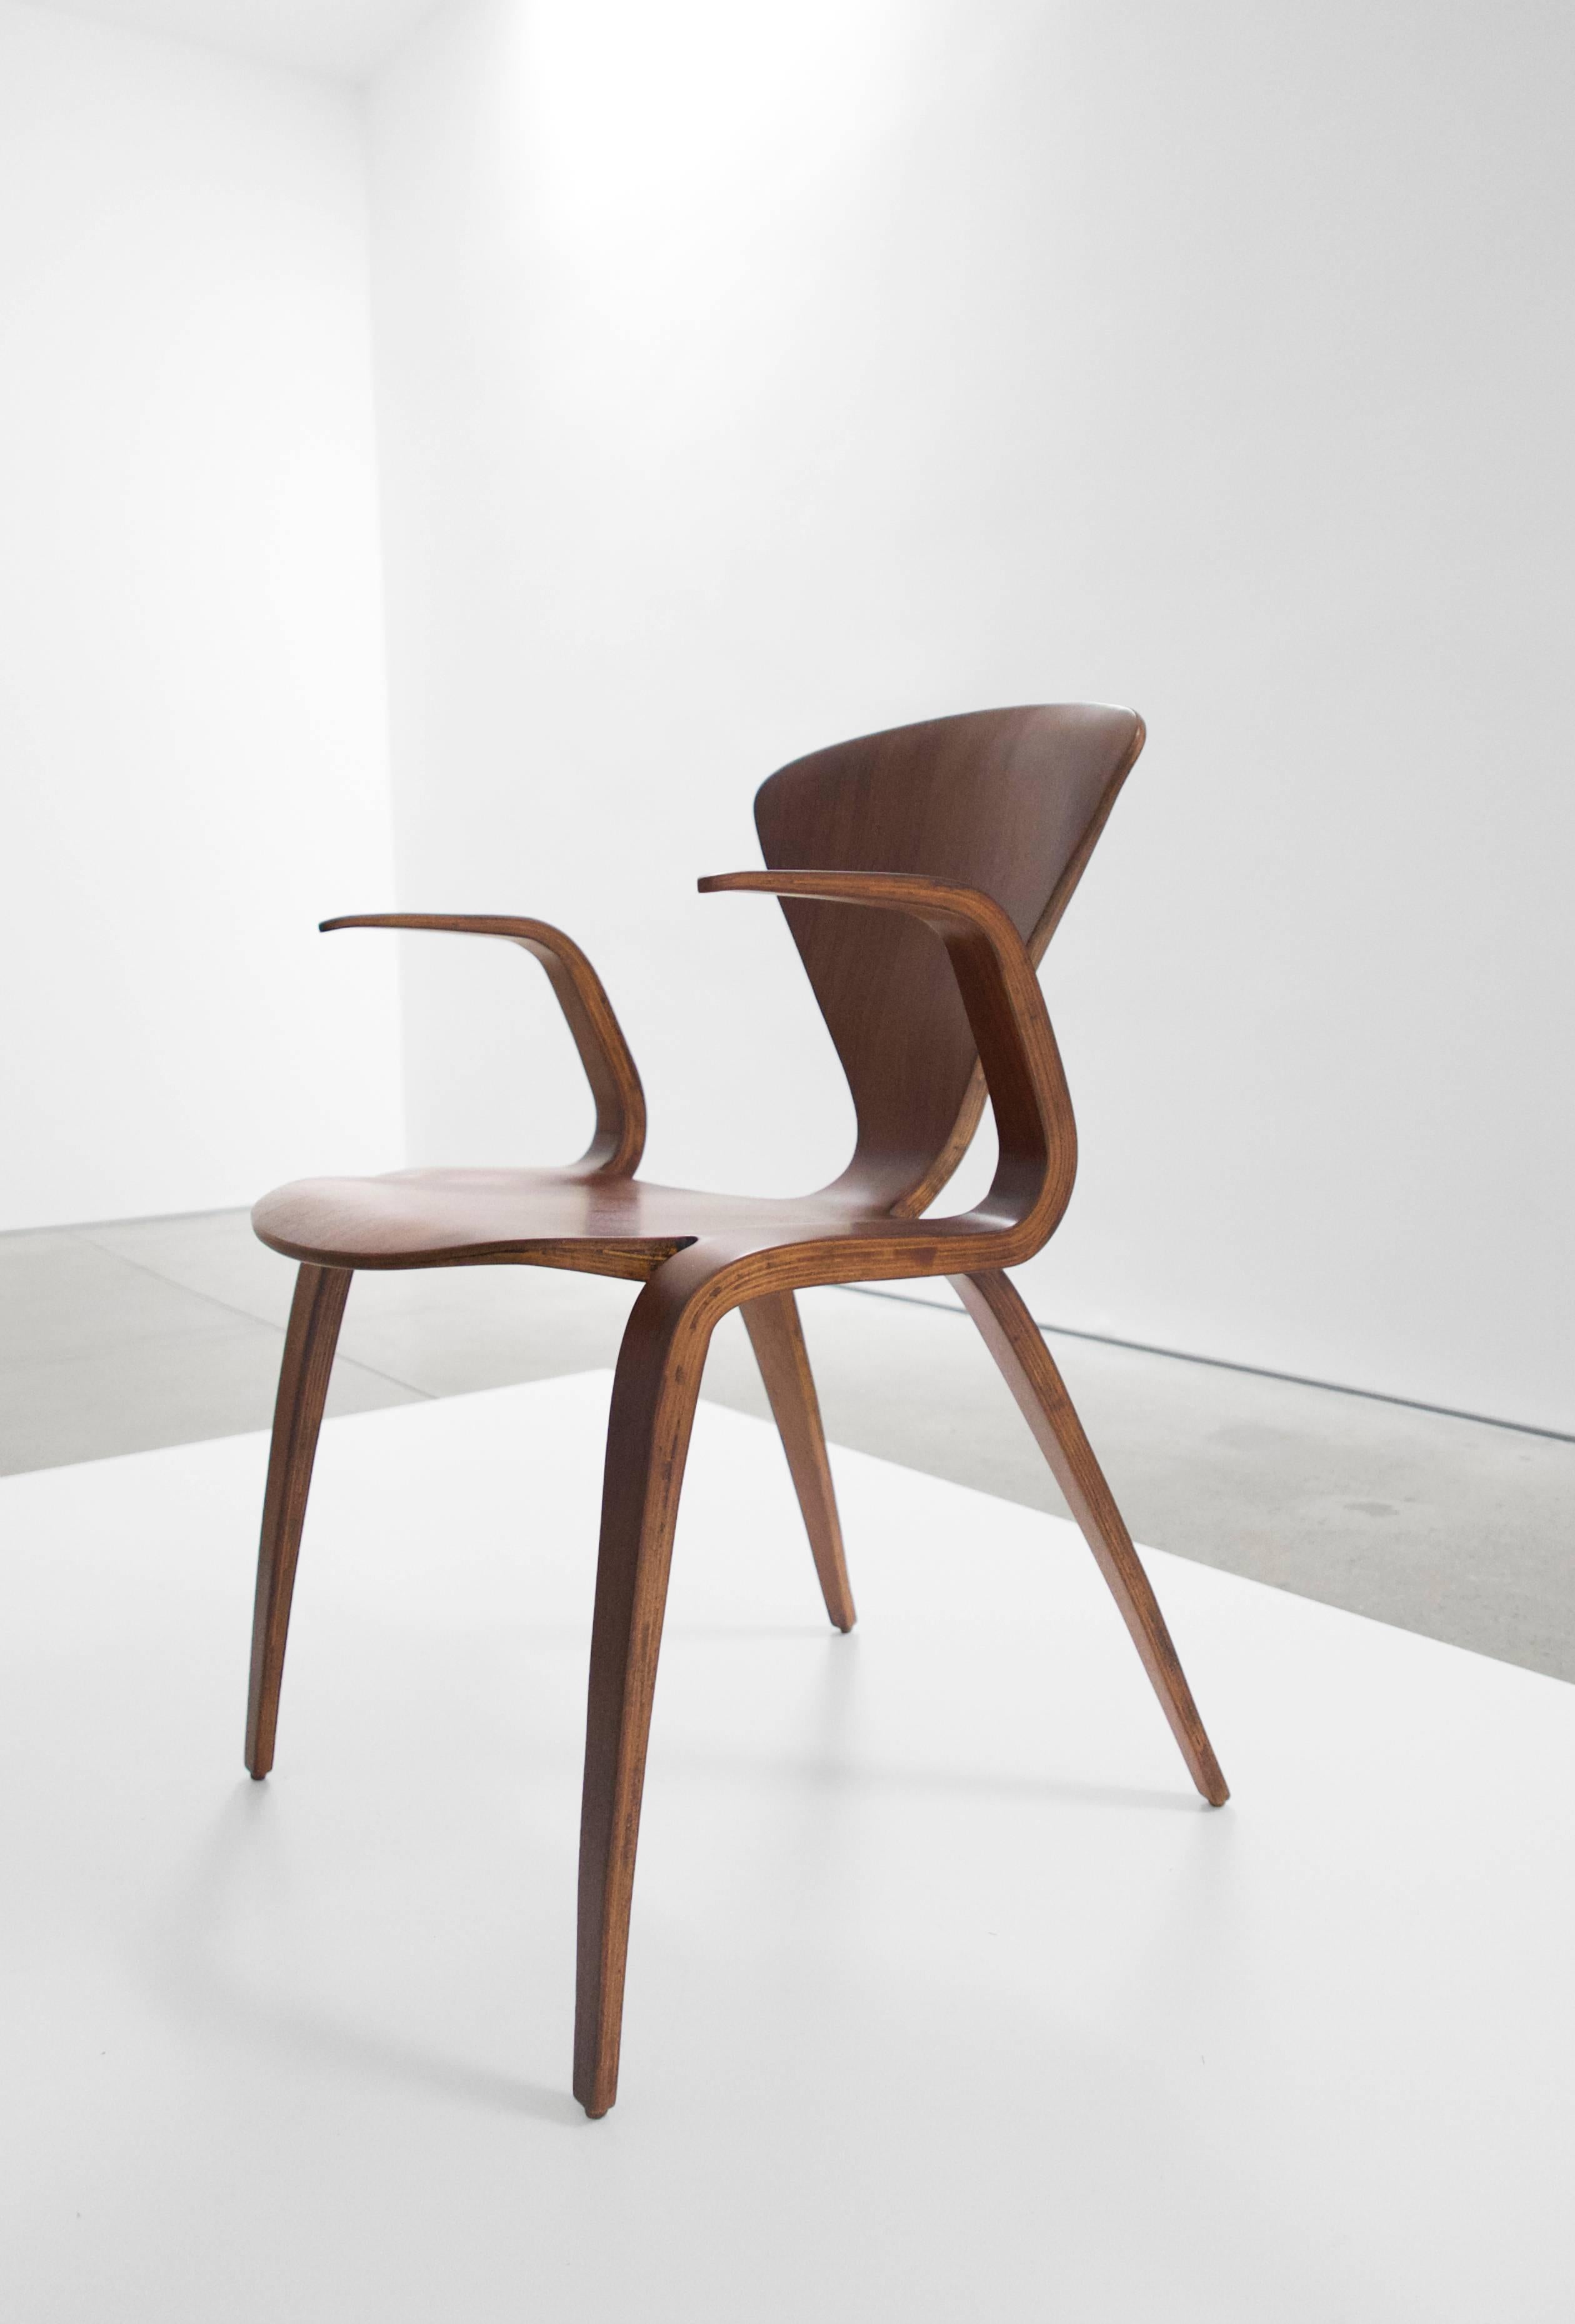 norman cherner chair